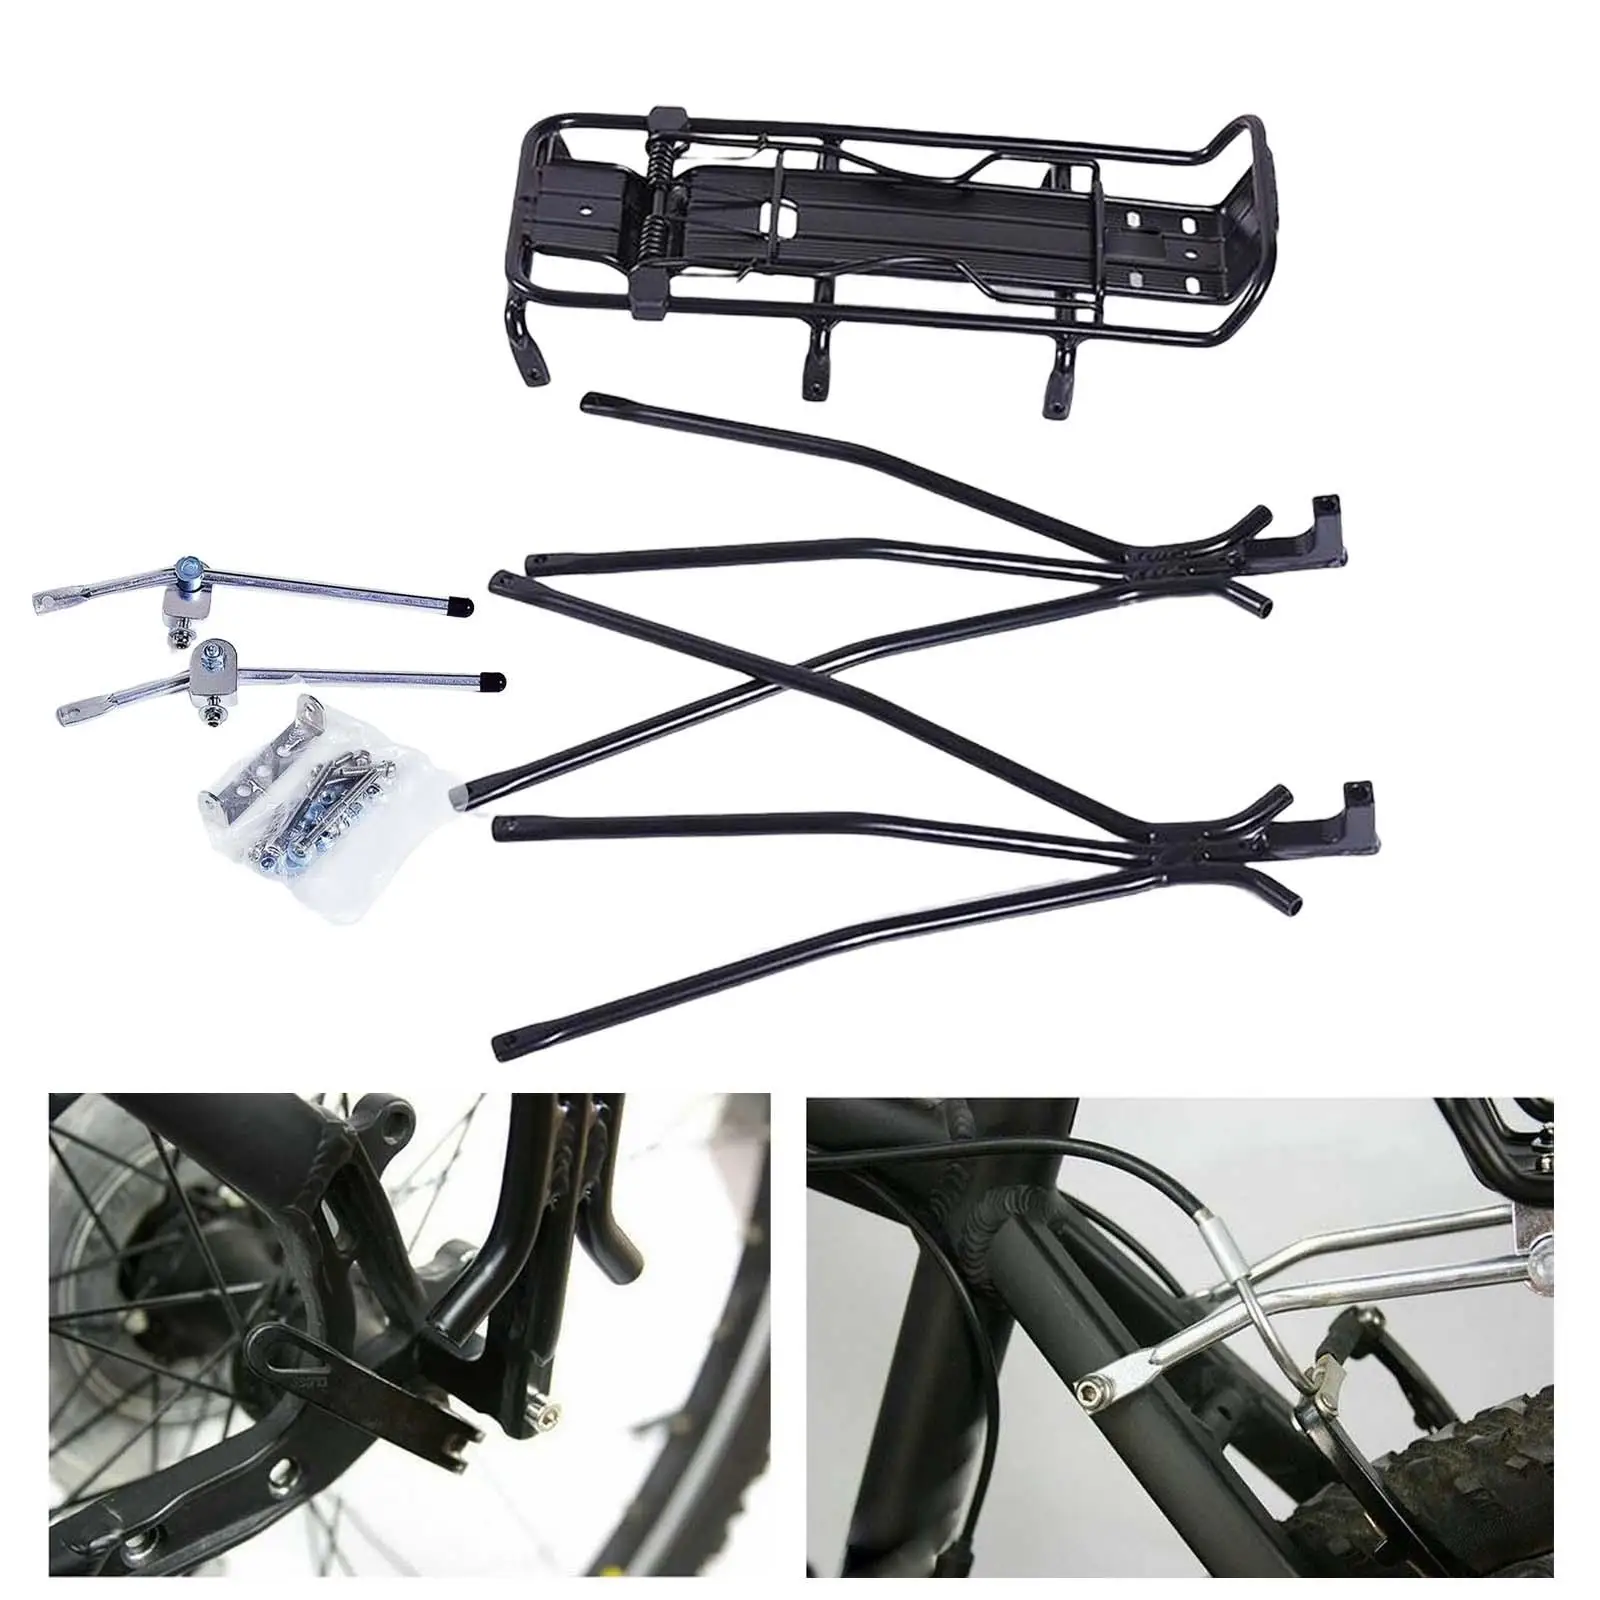 Mountain Road Bike Rear Carrier Rack Bicycle Cargo Pannier Rack Luggage Cycling